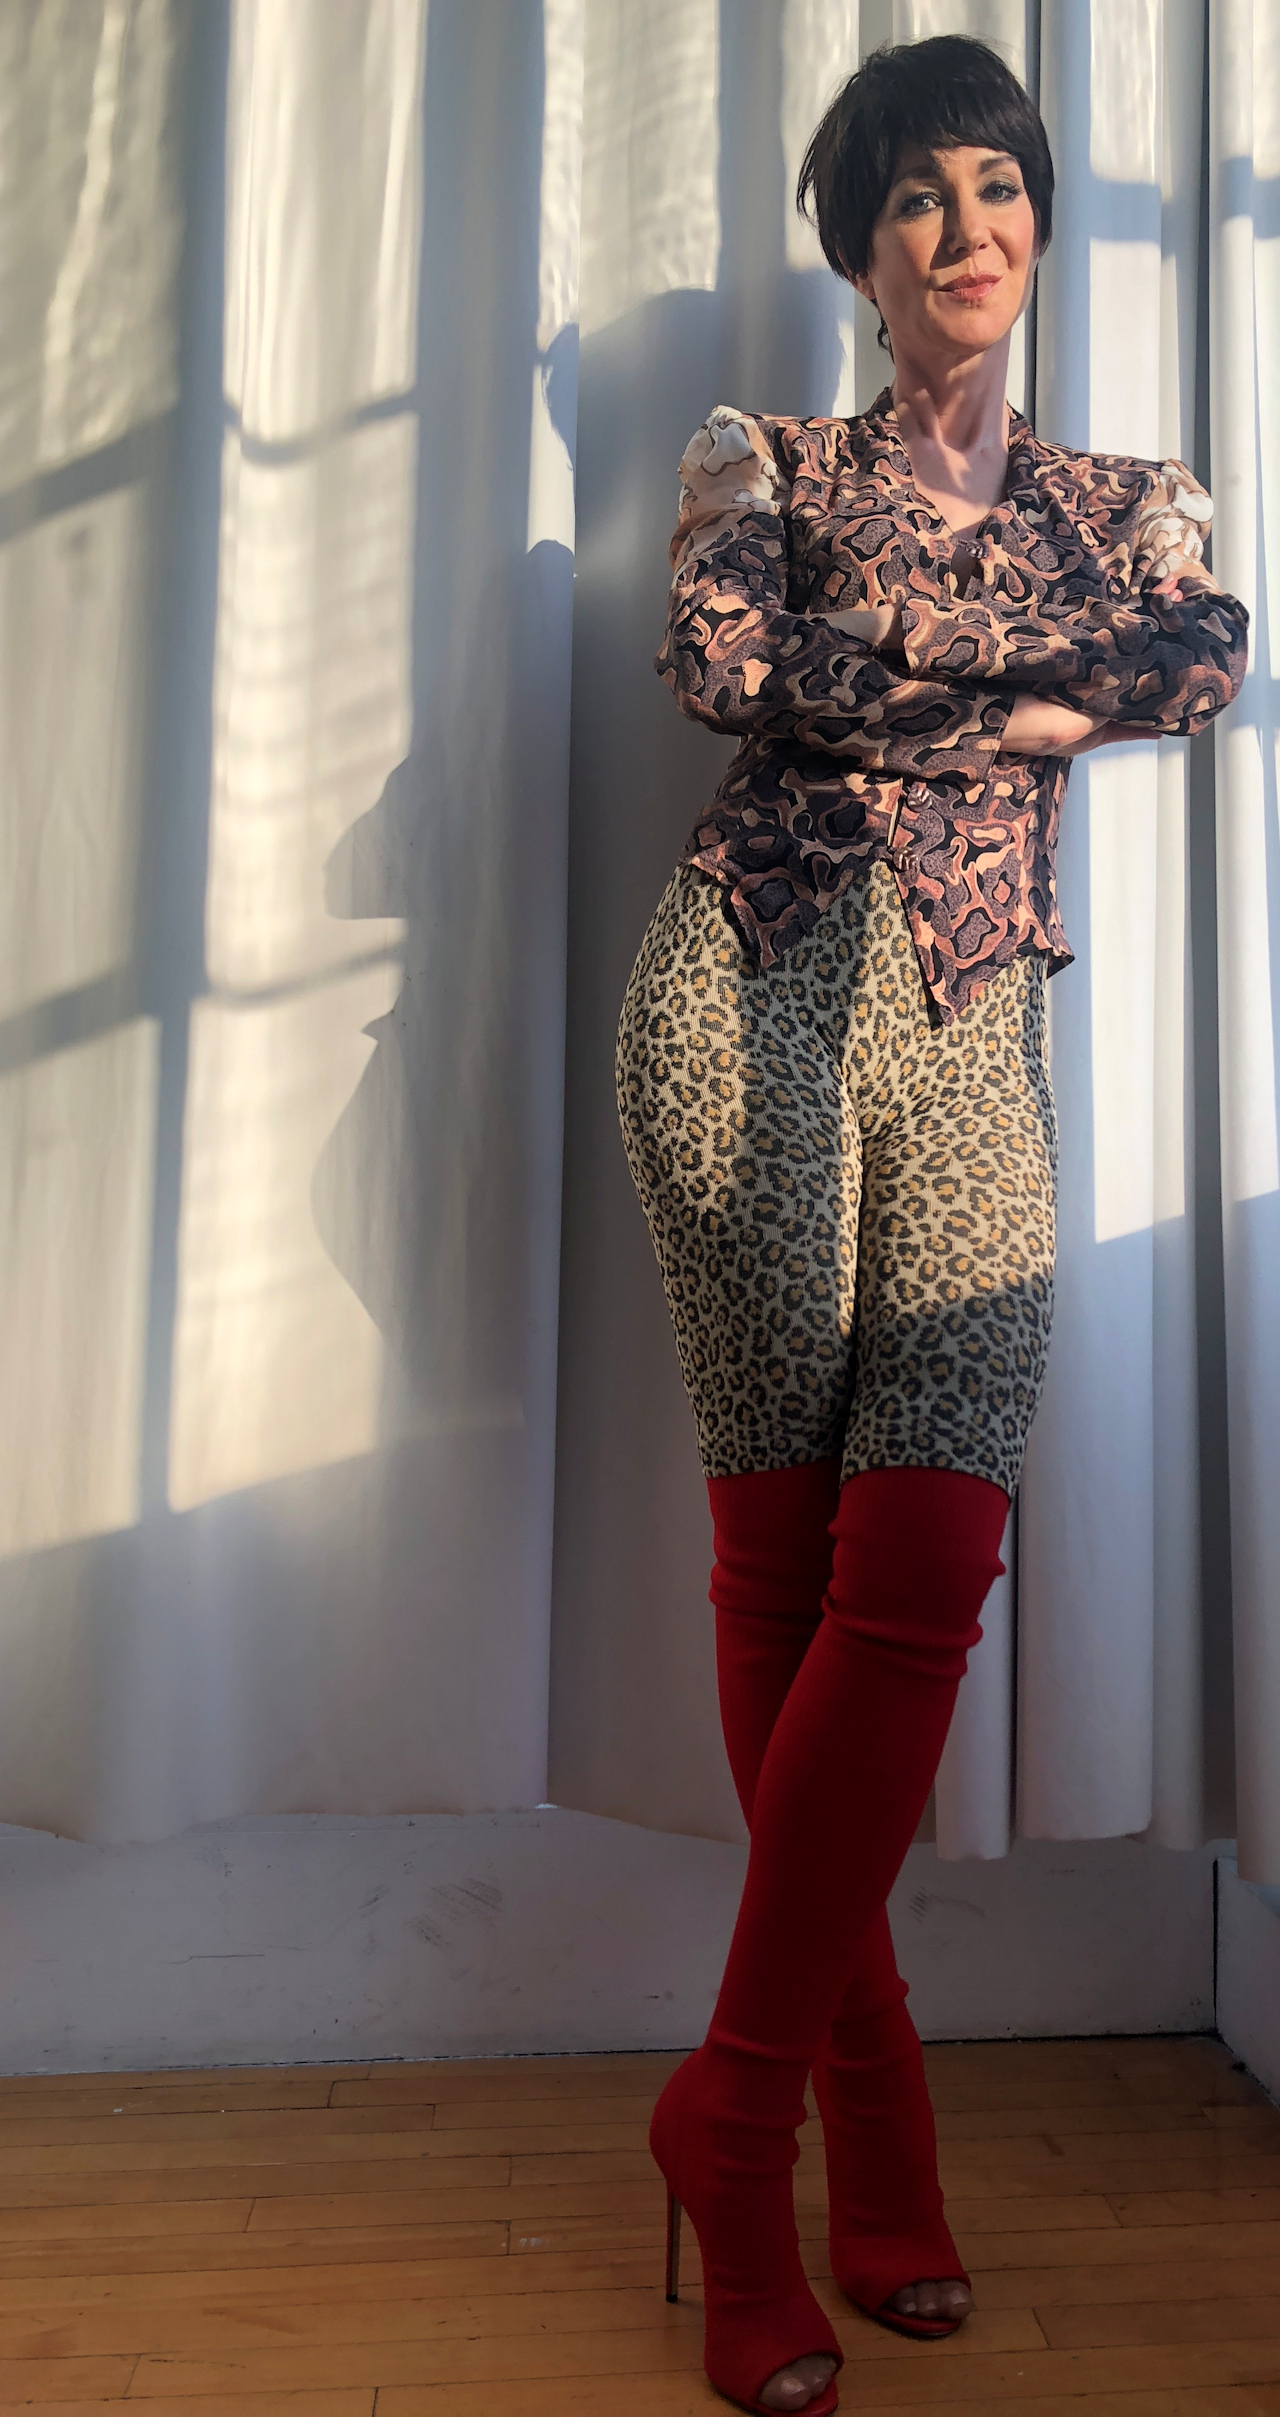 Karen's Quirky Style - West Village Model Karen Rempel - in red boots and leopard print